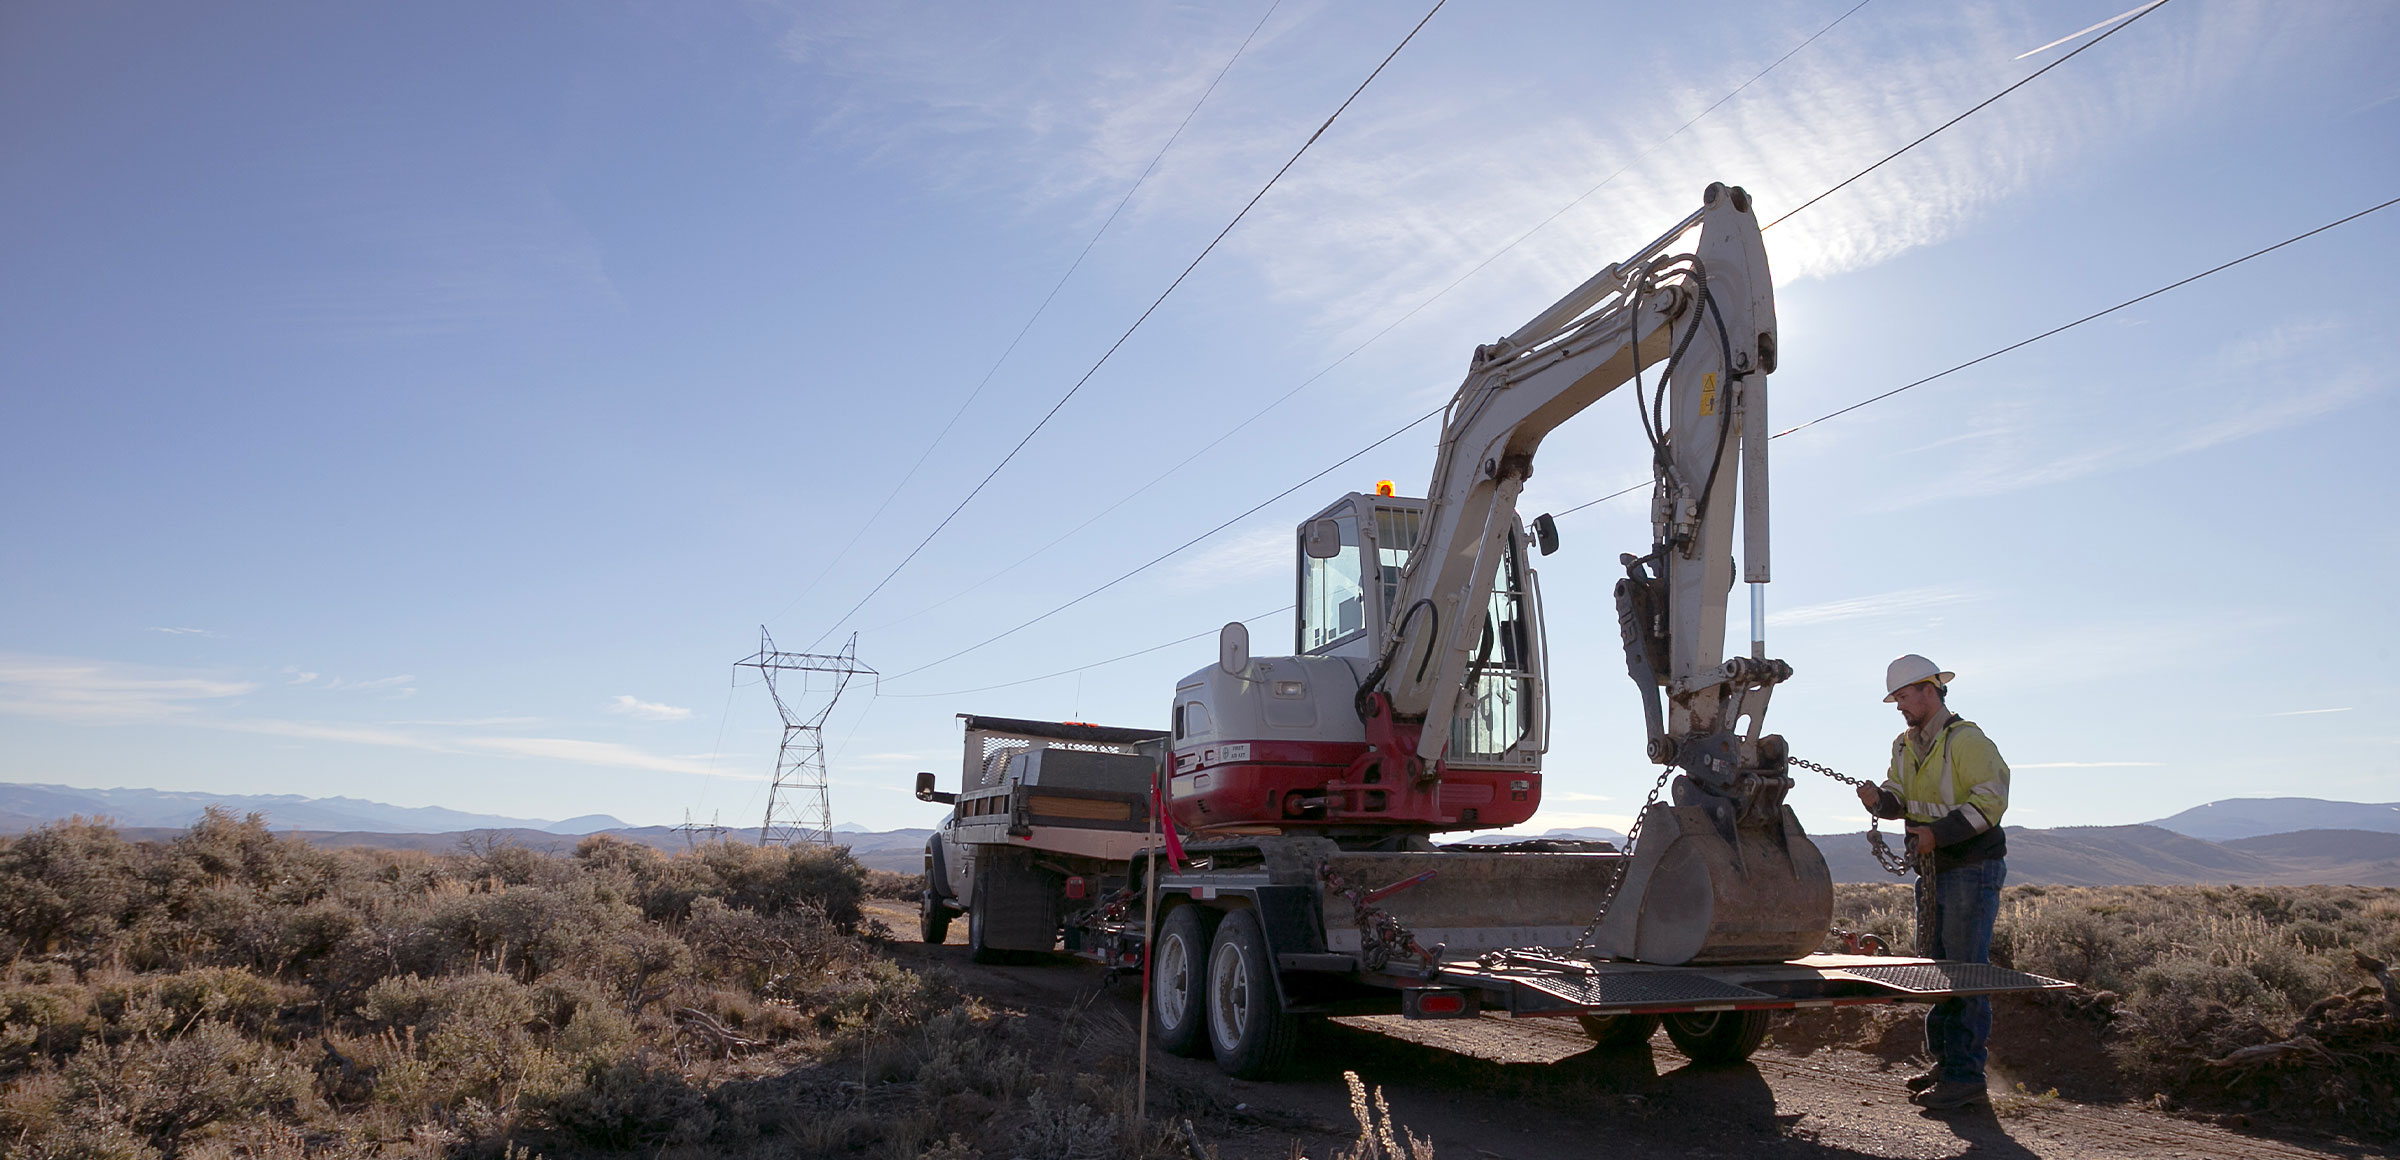 ENDESA (ENEL): Faster and simpler installation of underground cables in Medium Voltage (MV) lines